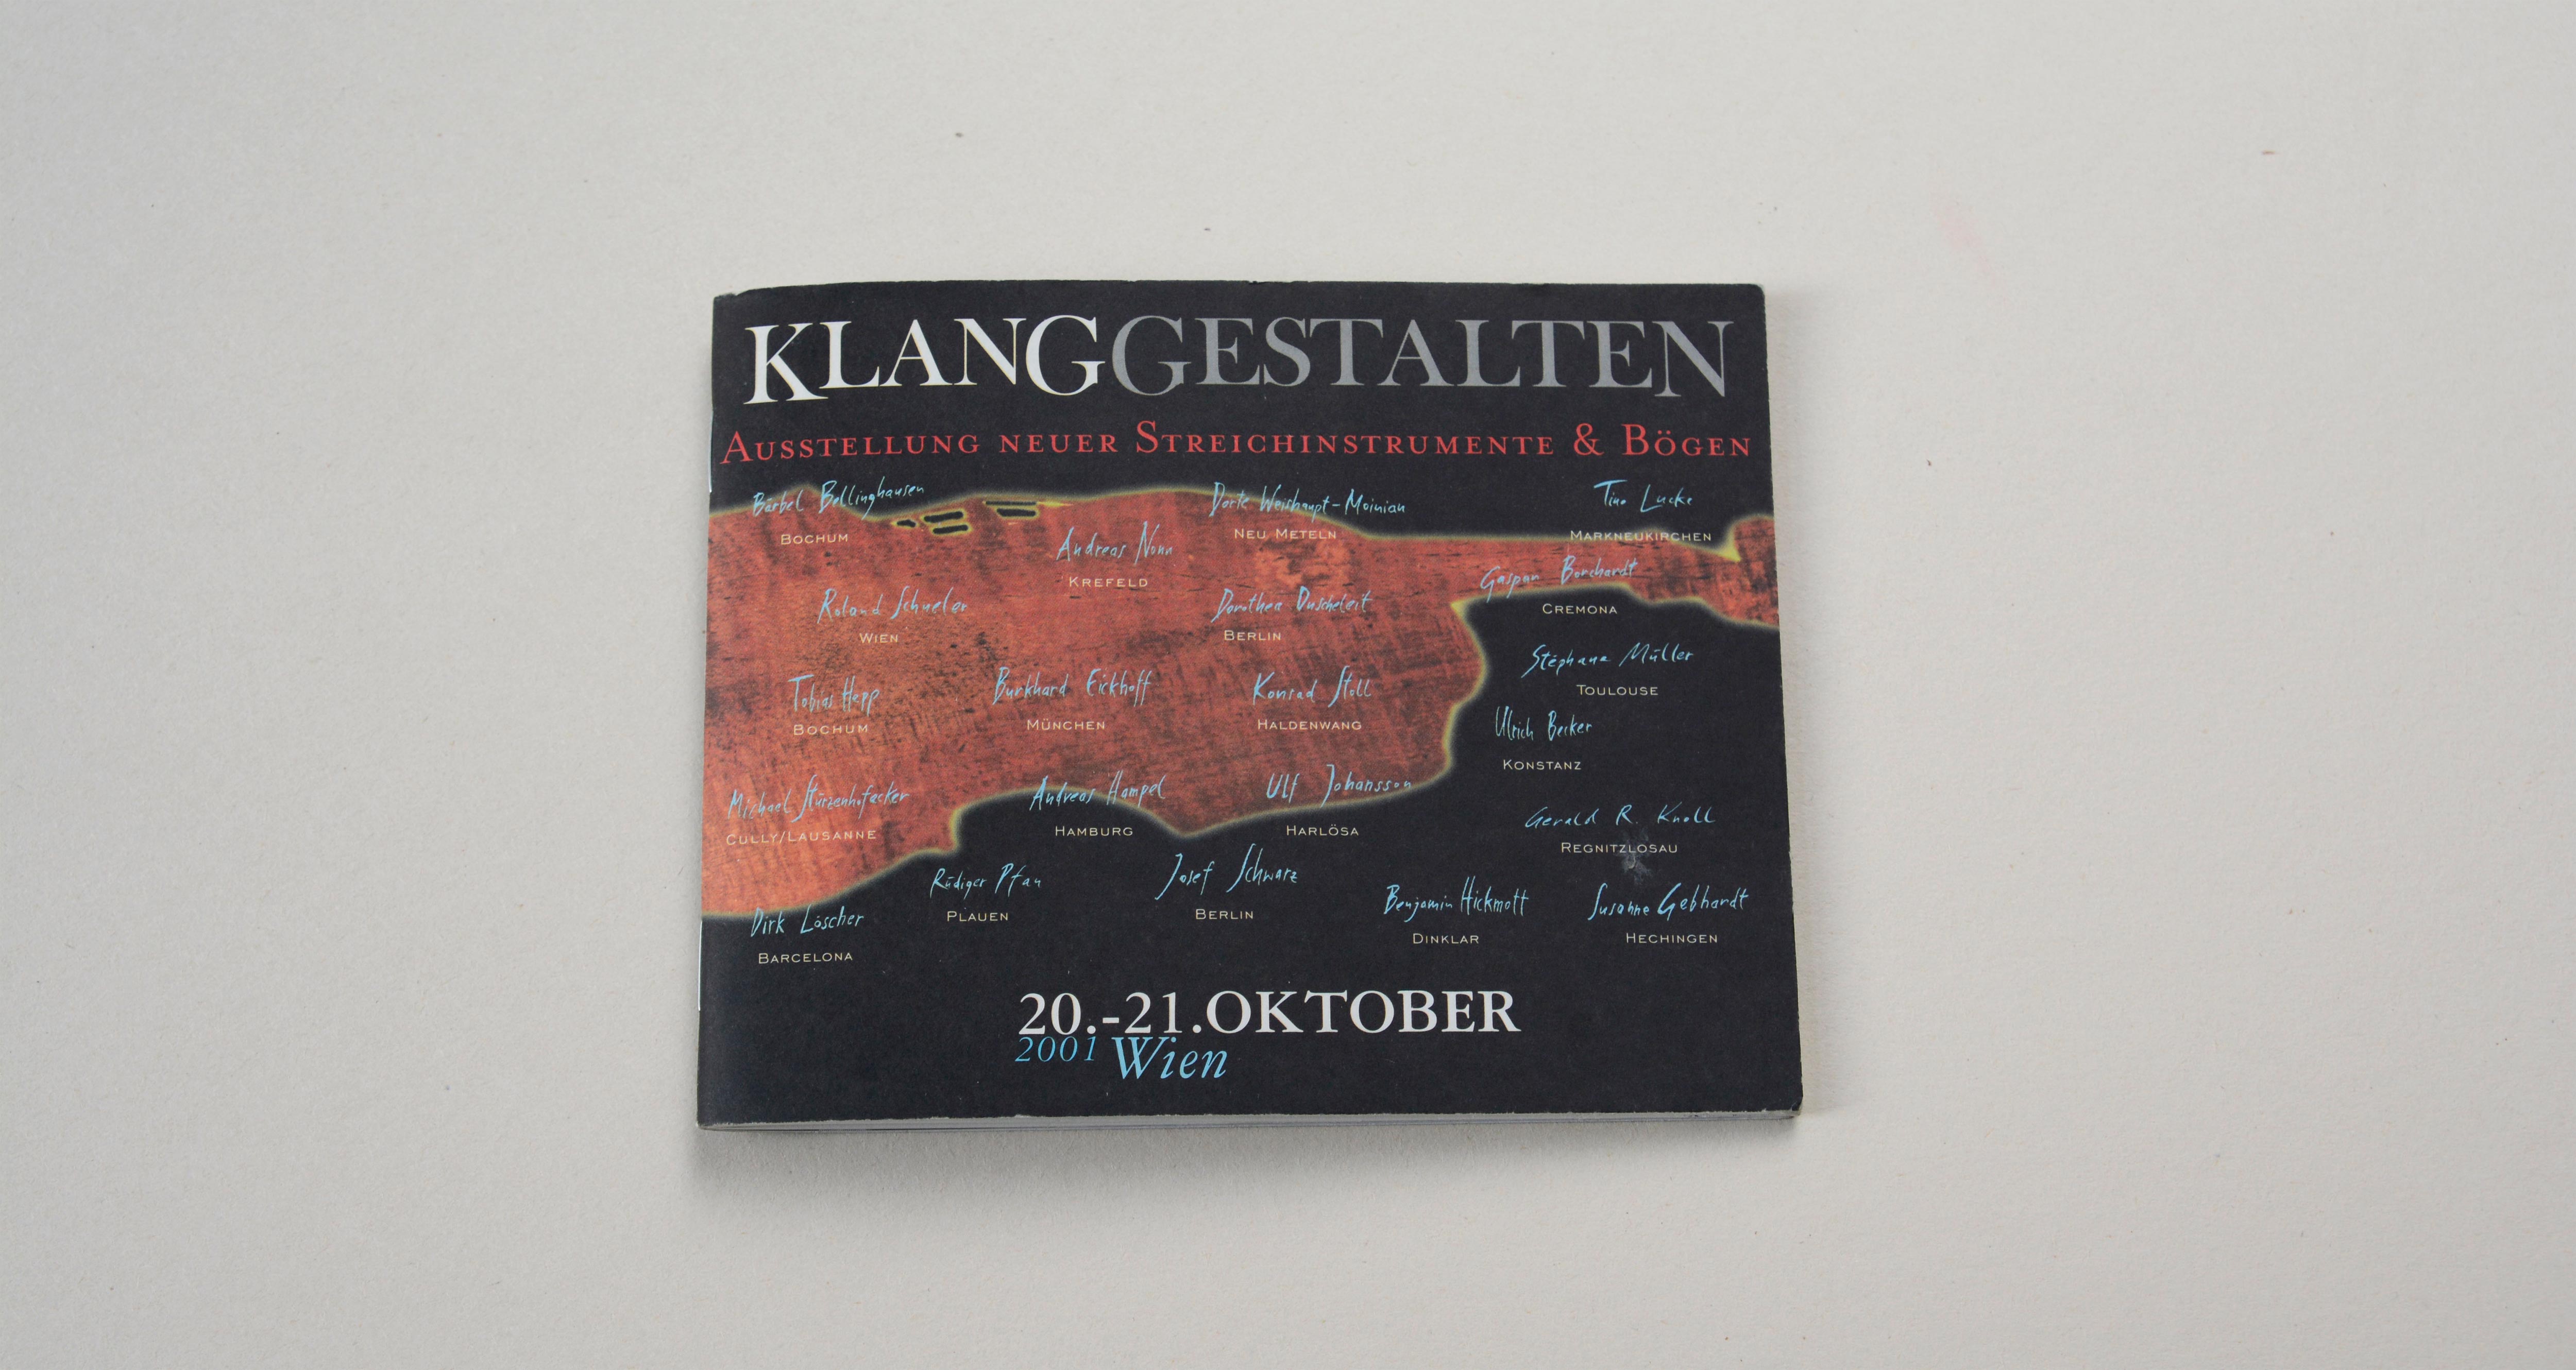 Cover catalogue landscape format. Black background. Large silhouette of violin in the middle. Large logo/title above. Line of text underneath. Several signatures overlayed on entire cover.